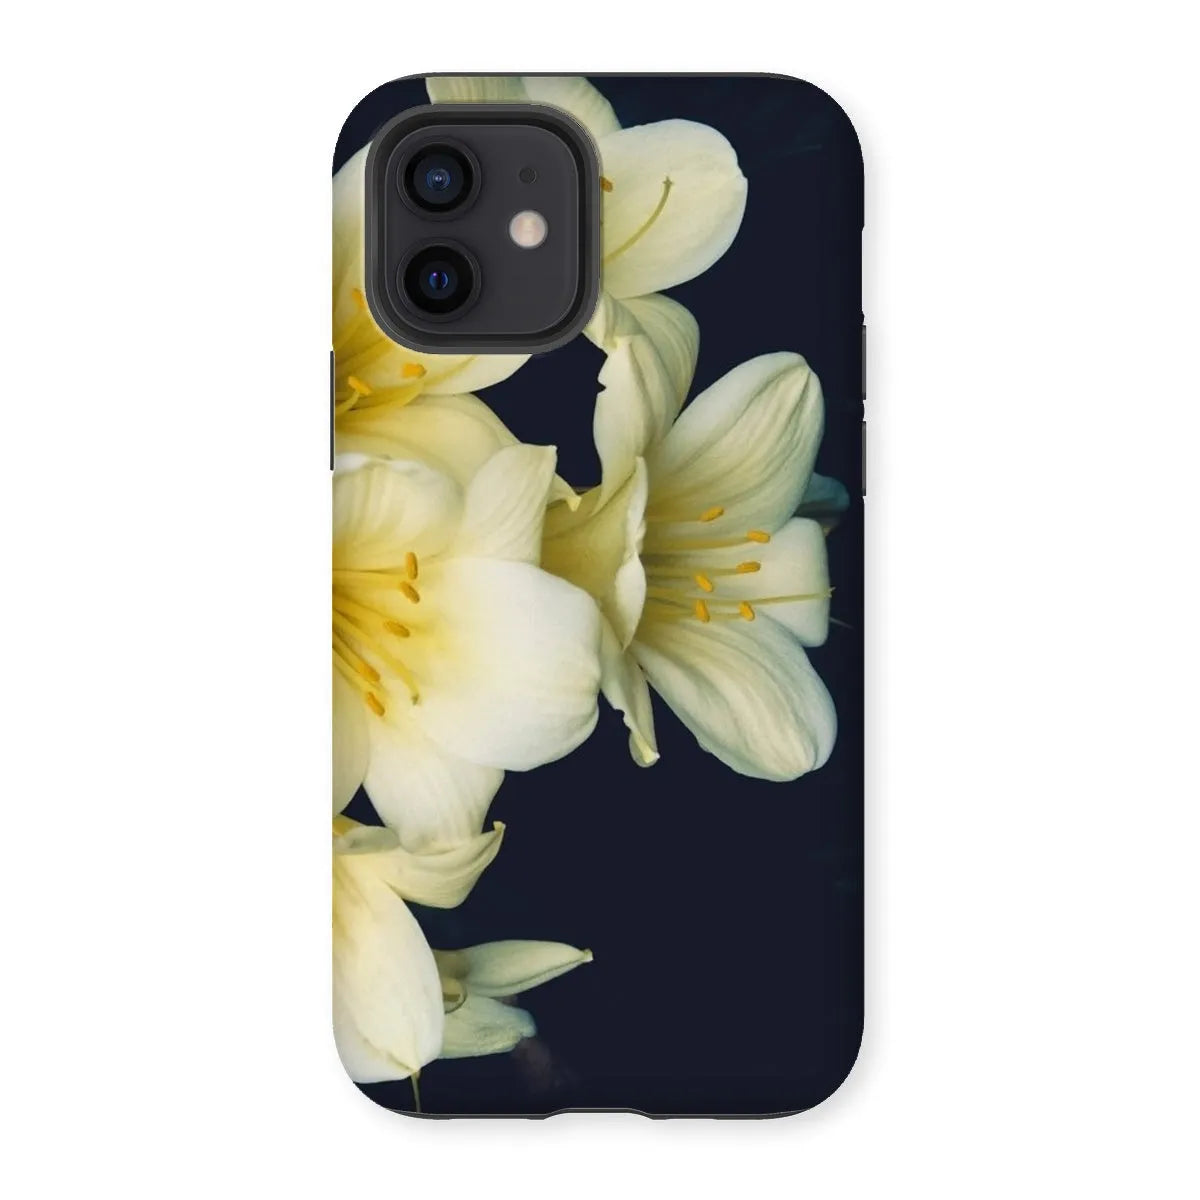 Flower Power Too Tough Phone Case - Iphone 12 / Matte - Mobile Phone Cases - Aesthetic Art